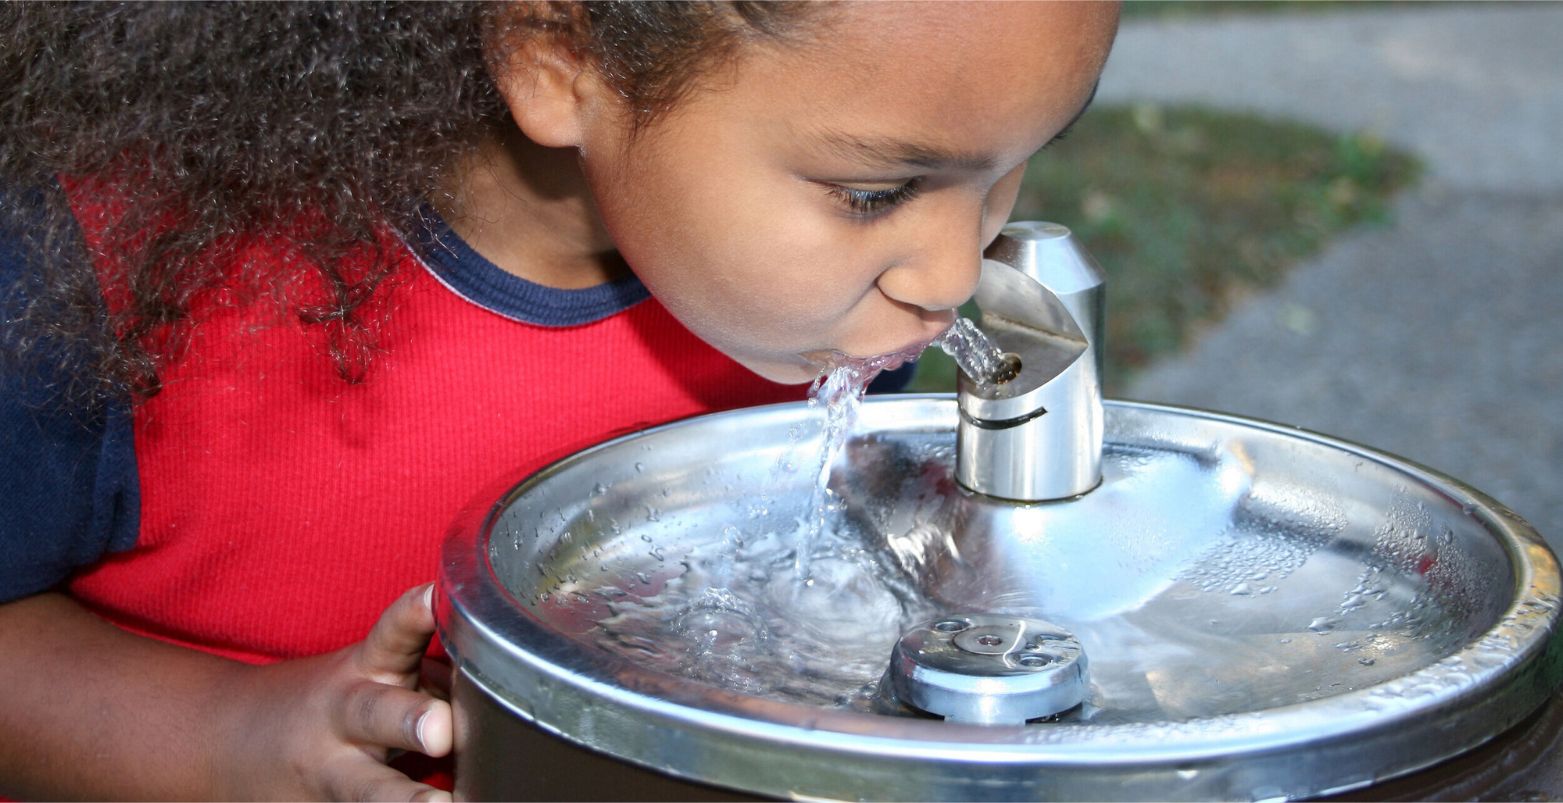 How To Drink From A Water Fountain